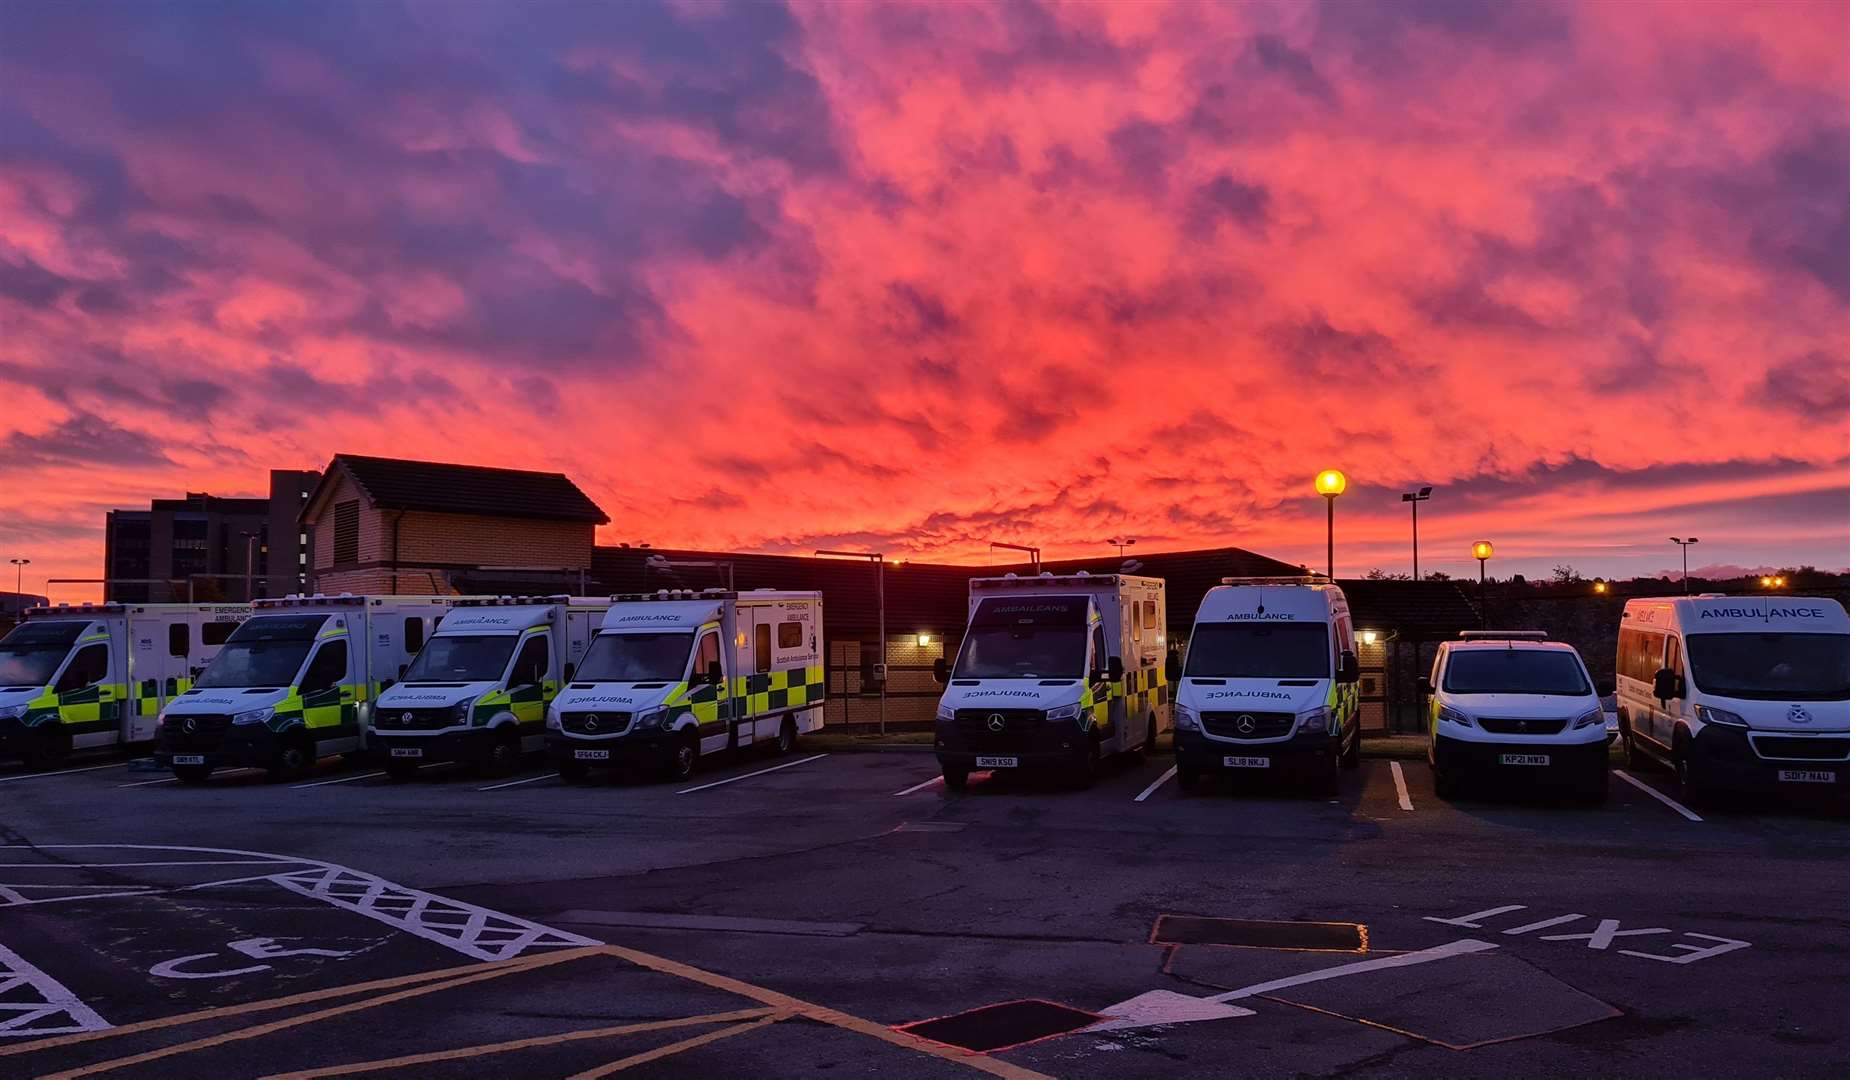 Over 100 new ambulance service staff have been recruited in the north.